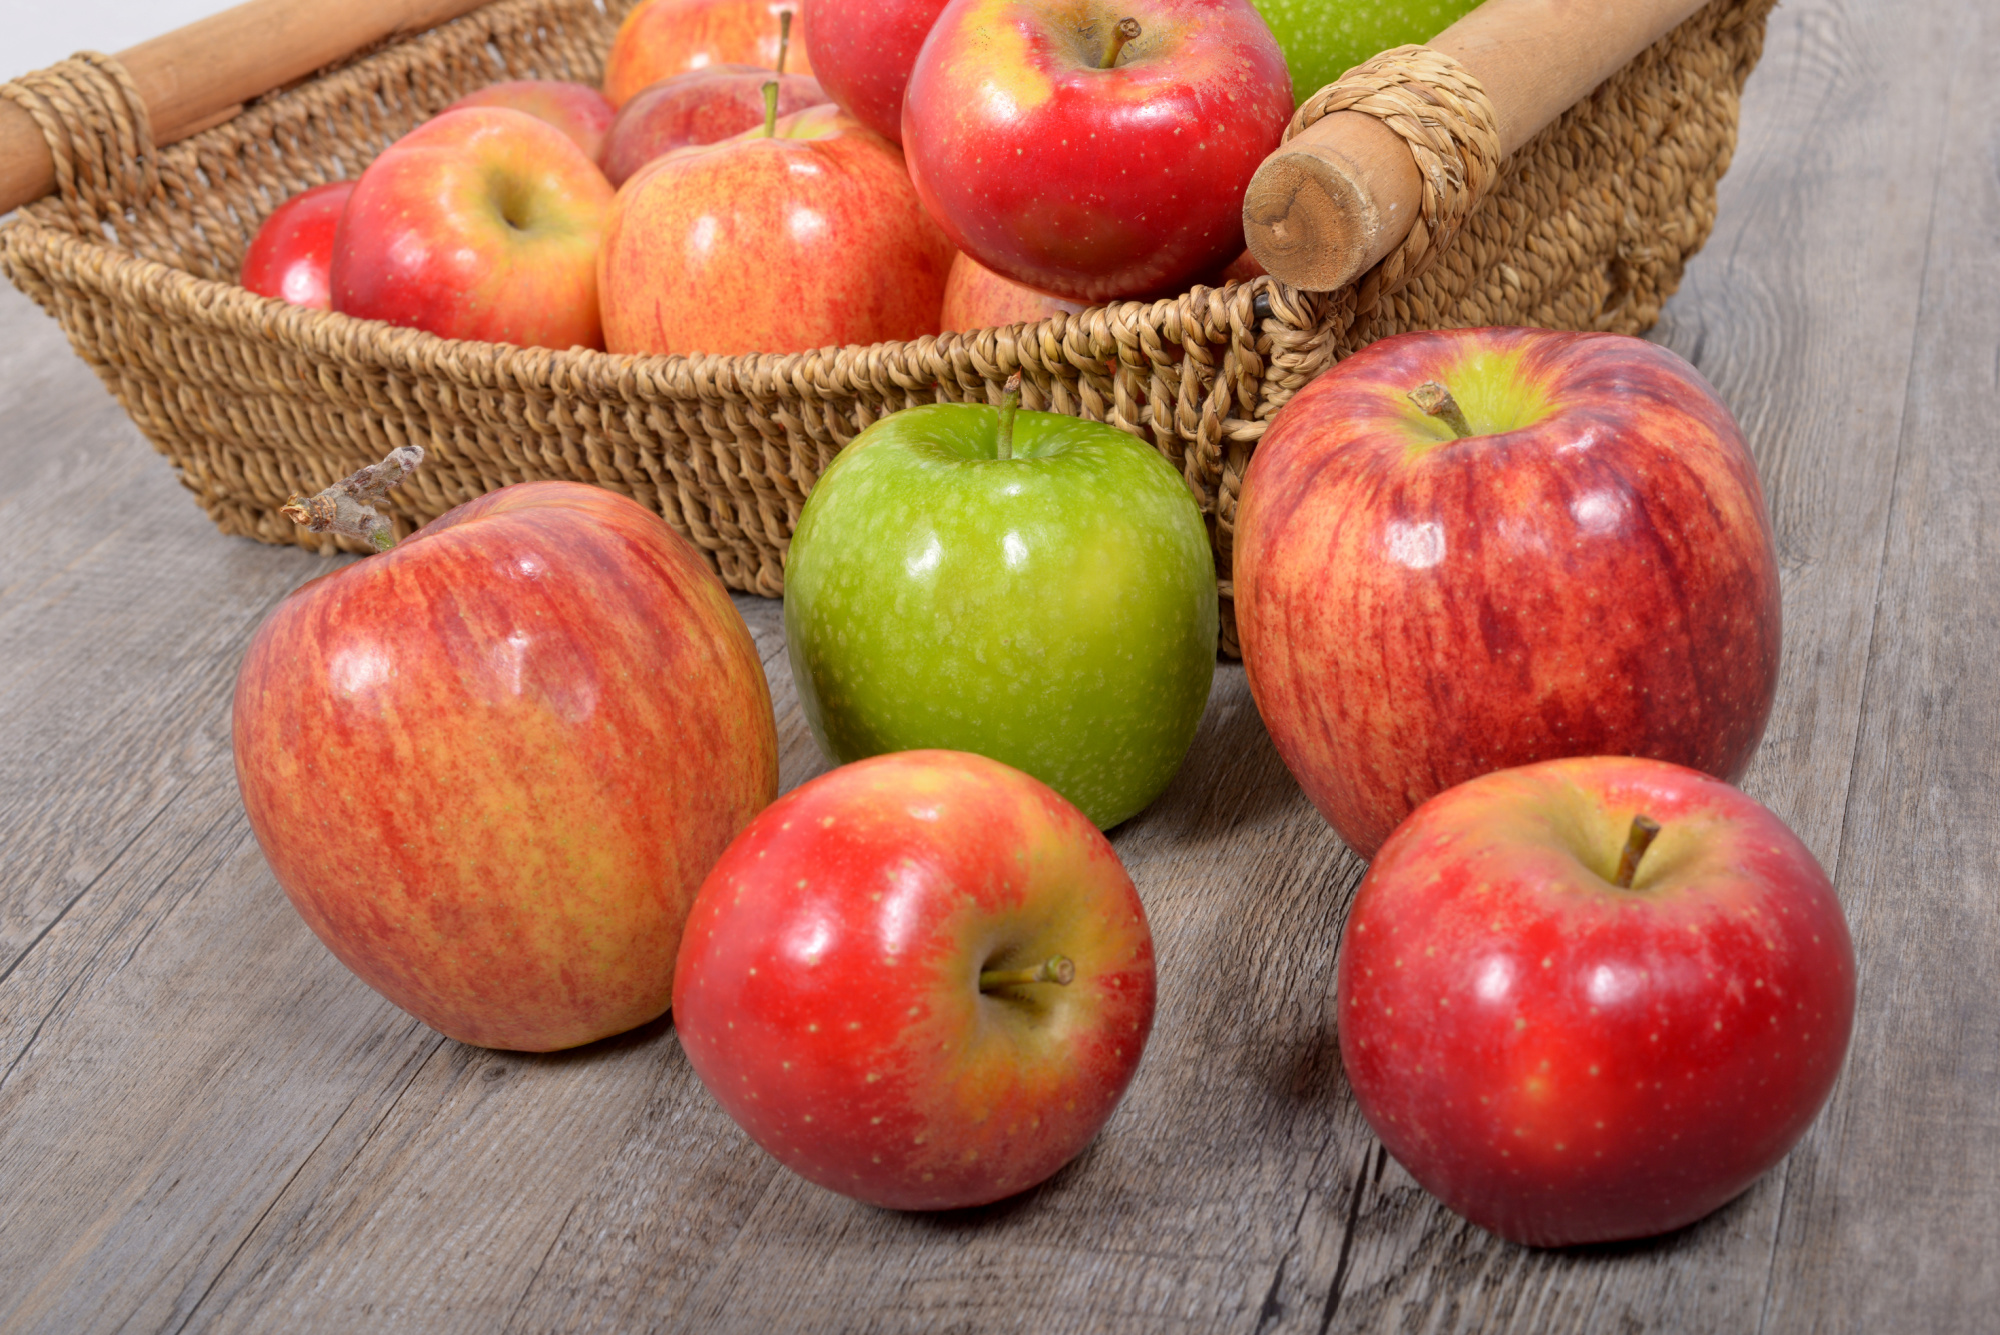 A basket full of apples on a wooden table.